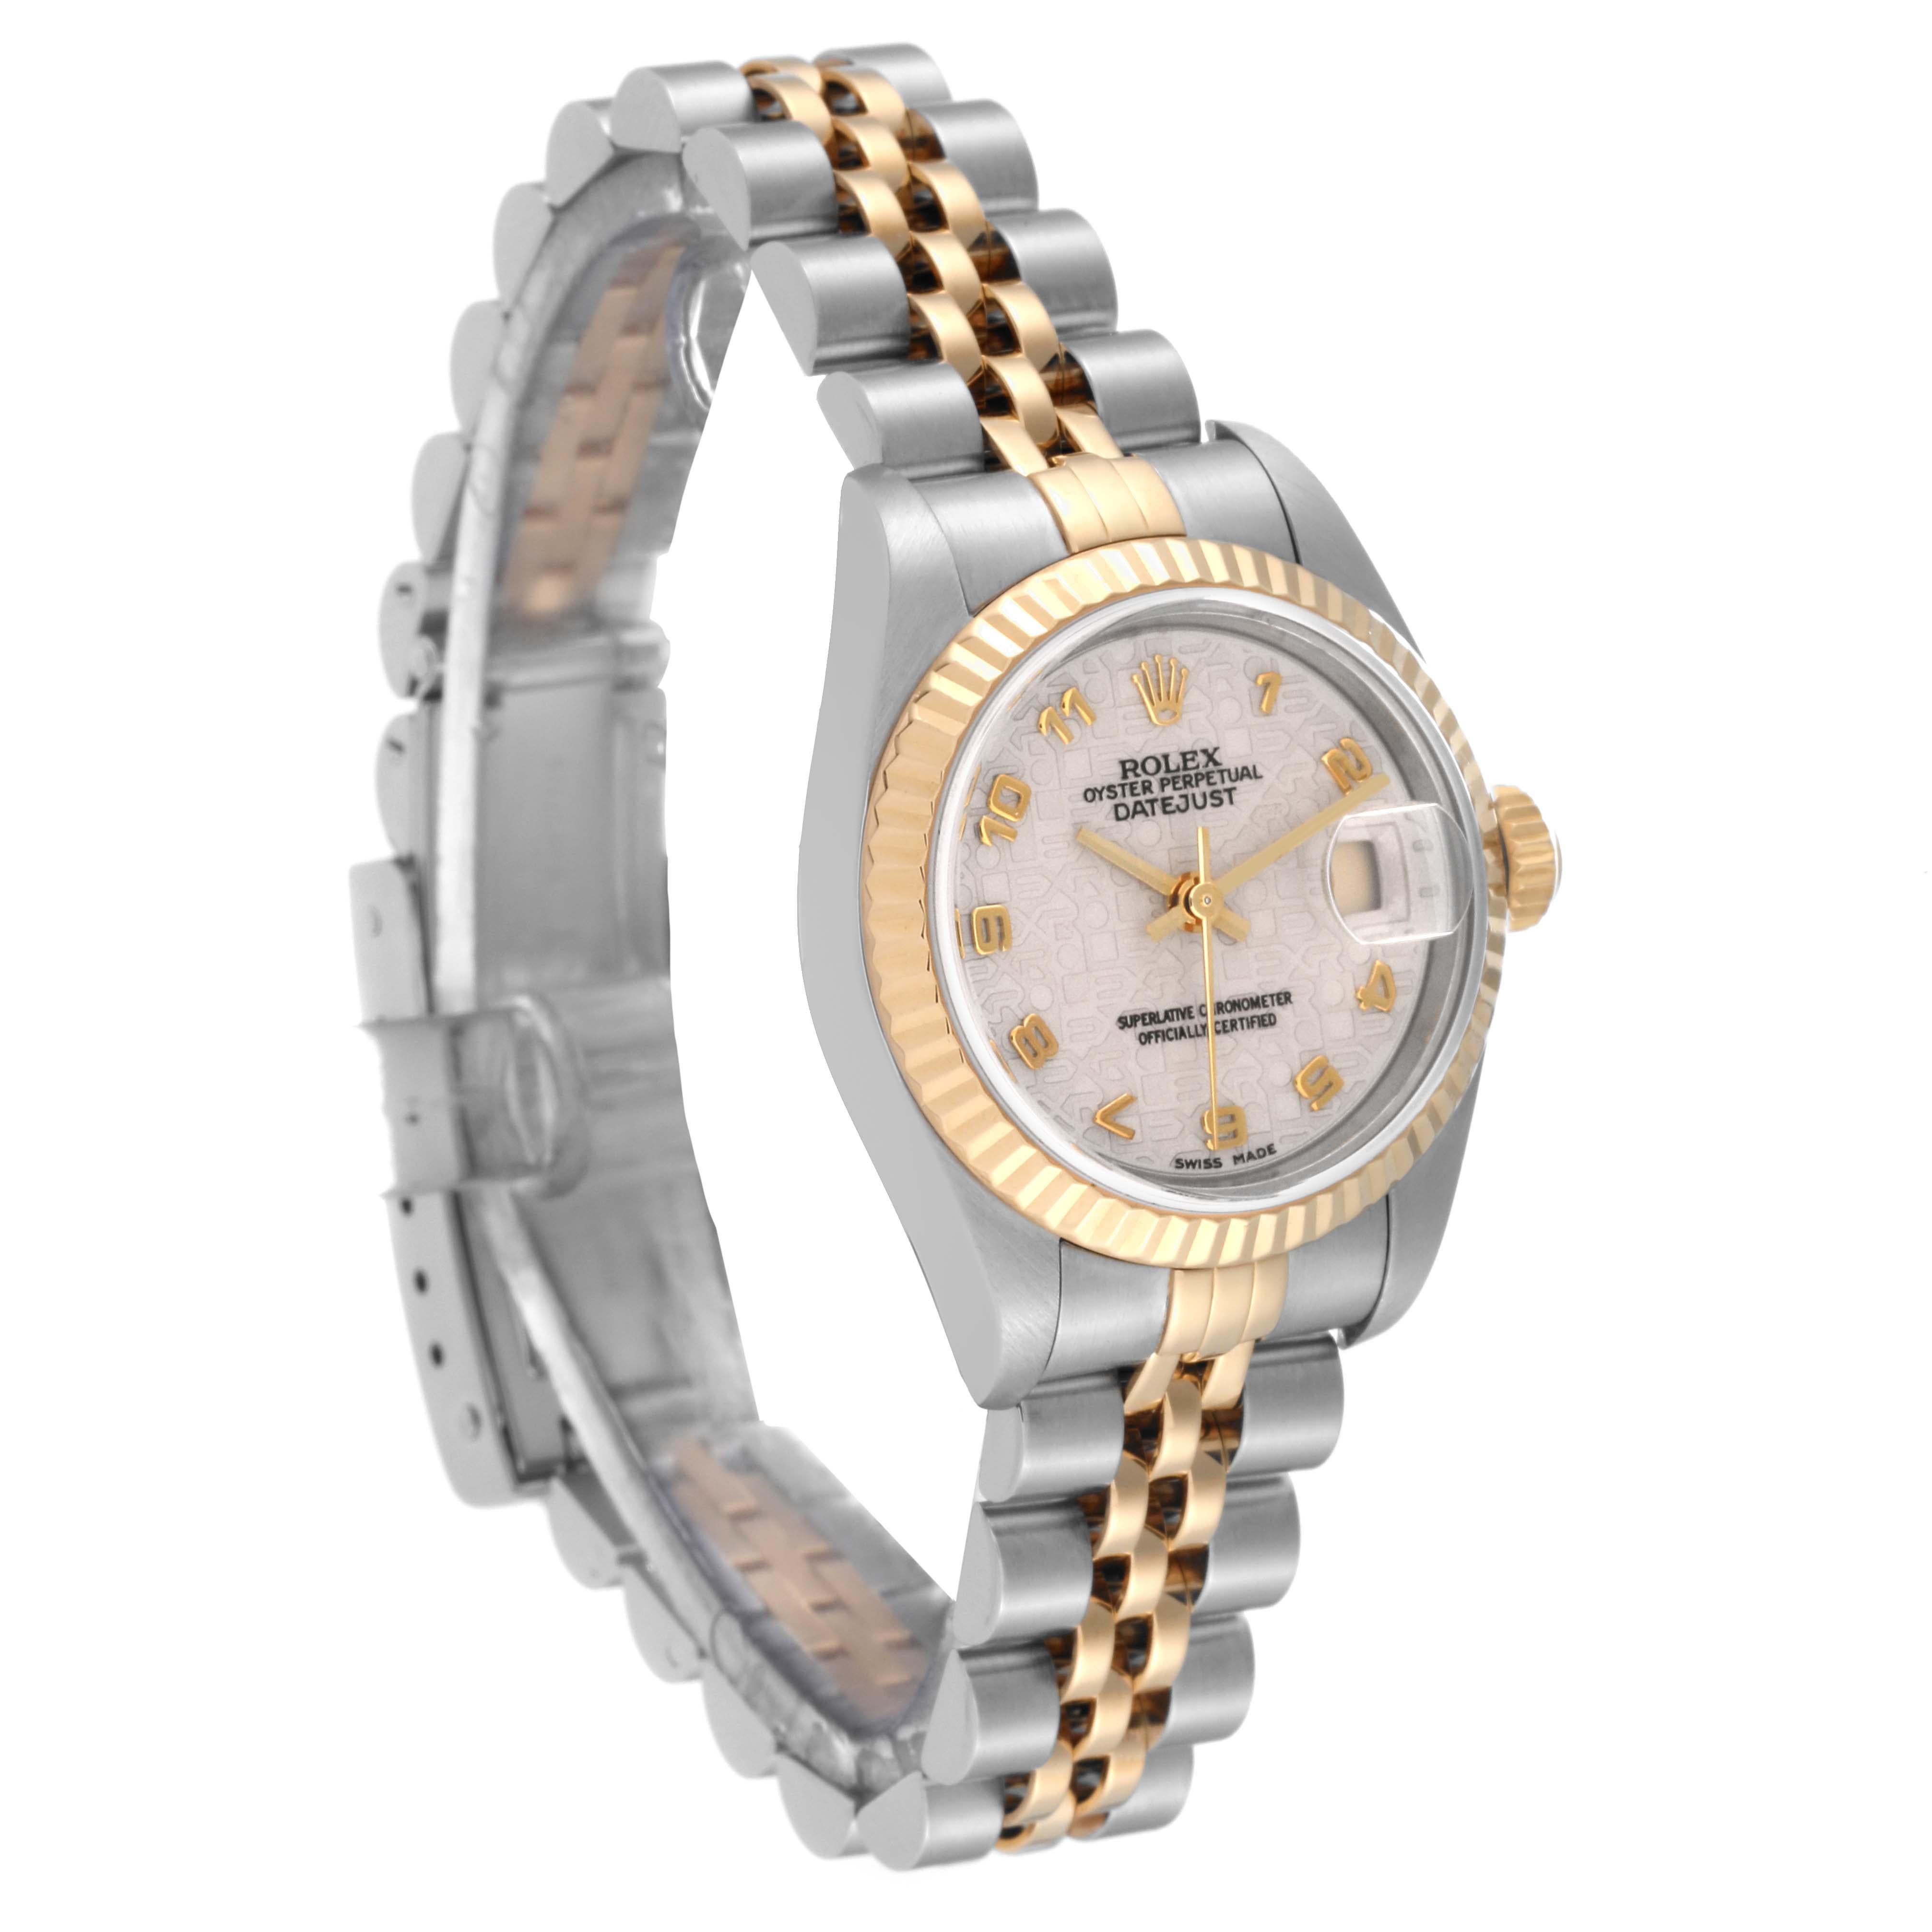 Rolex Datejust Steel Yellow Gold Ivory Anniversary Dial Ladies Watch 79173 In Good Condition For Sale In Atlanta, GA